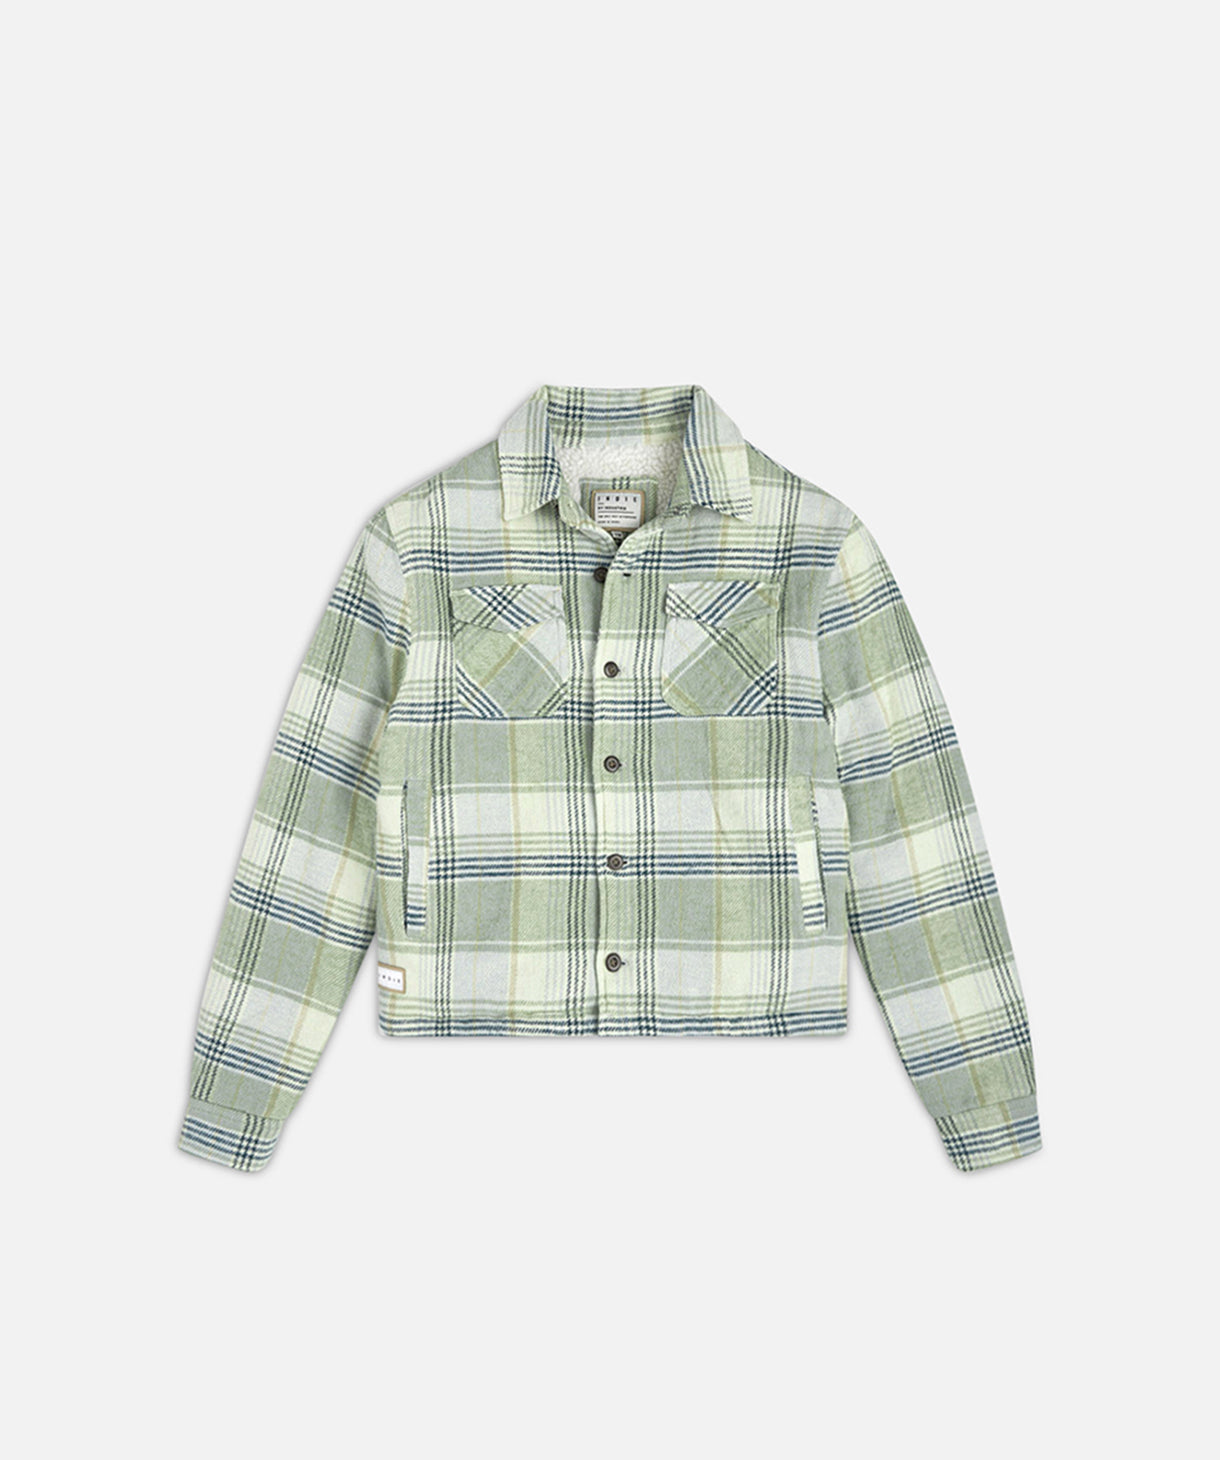 Shop The Jarvis Jacket - Green | Industrie Kids